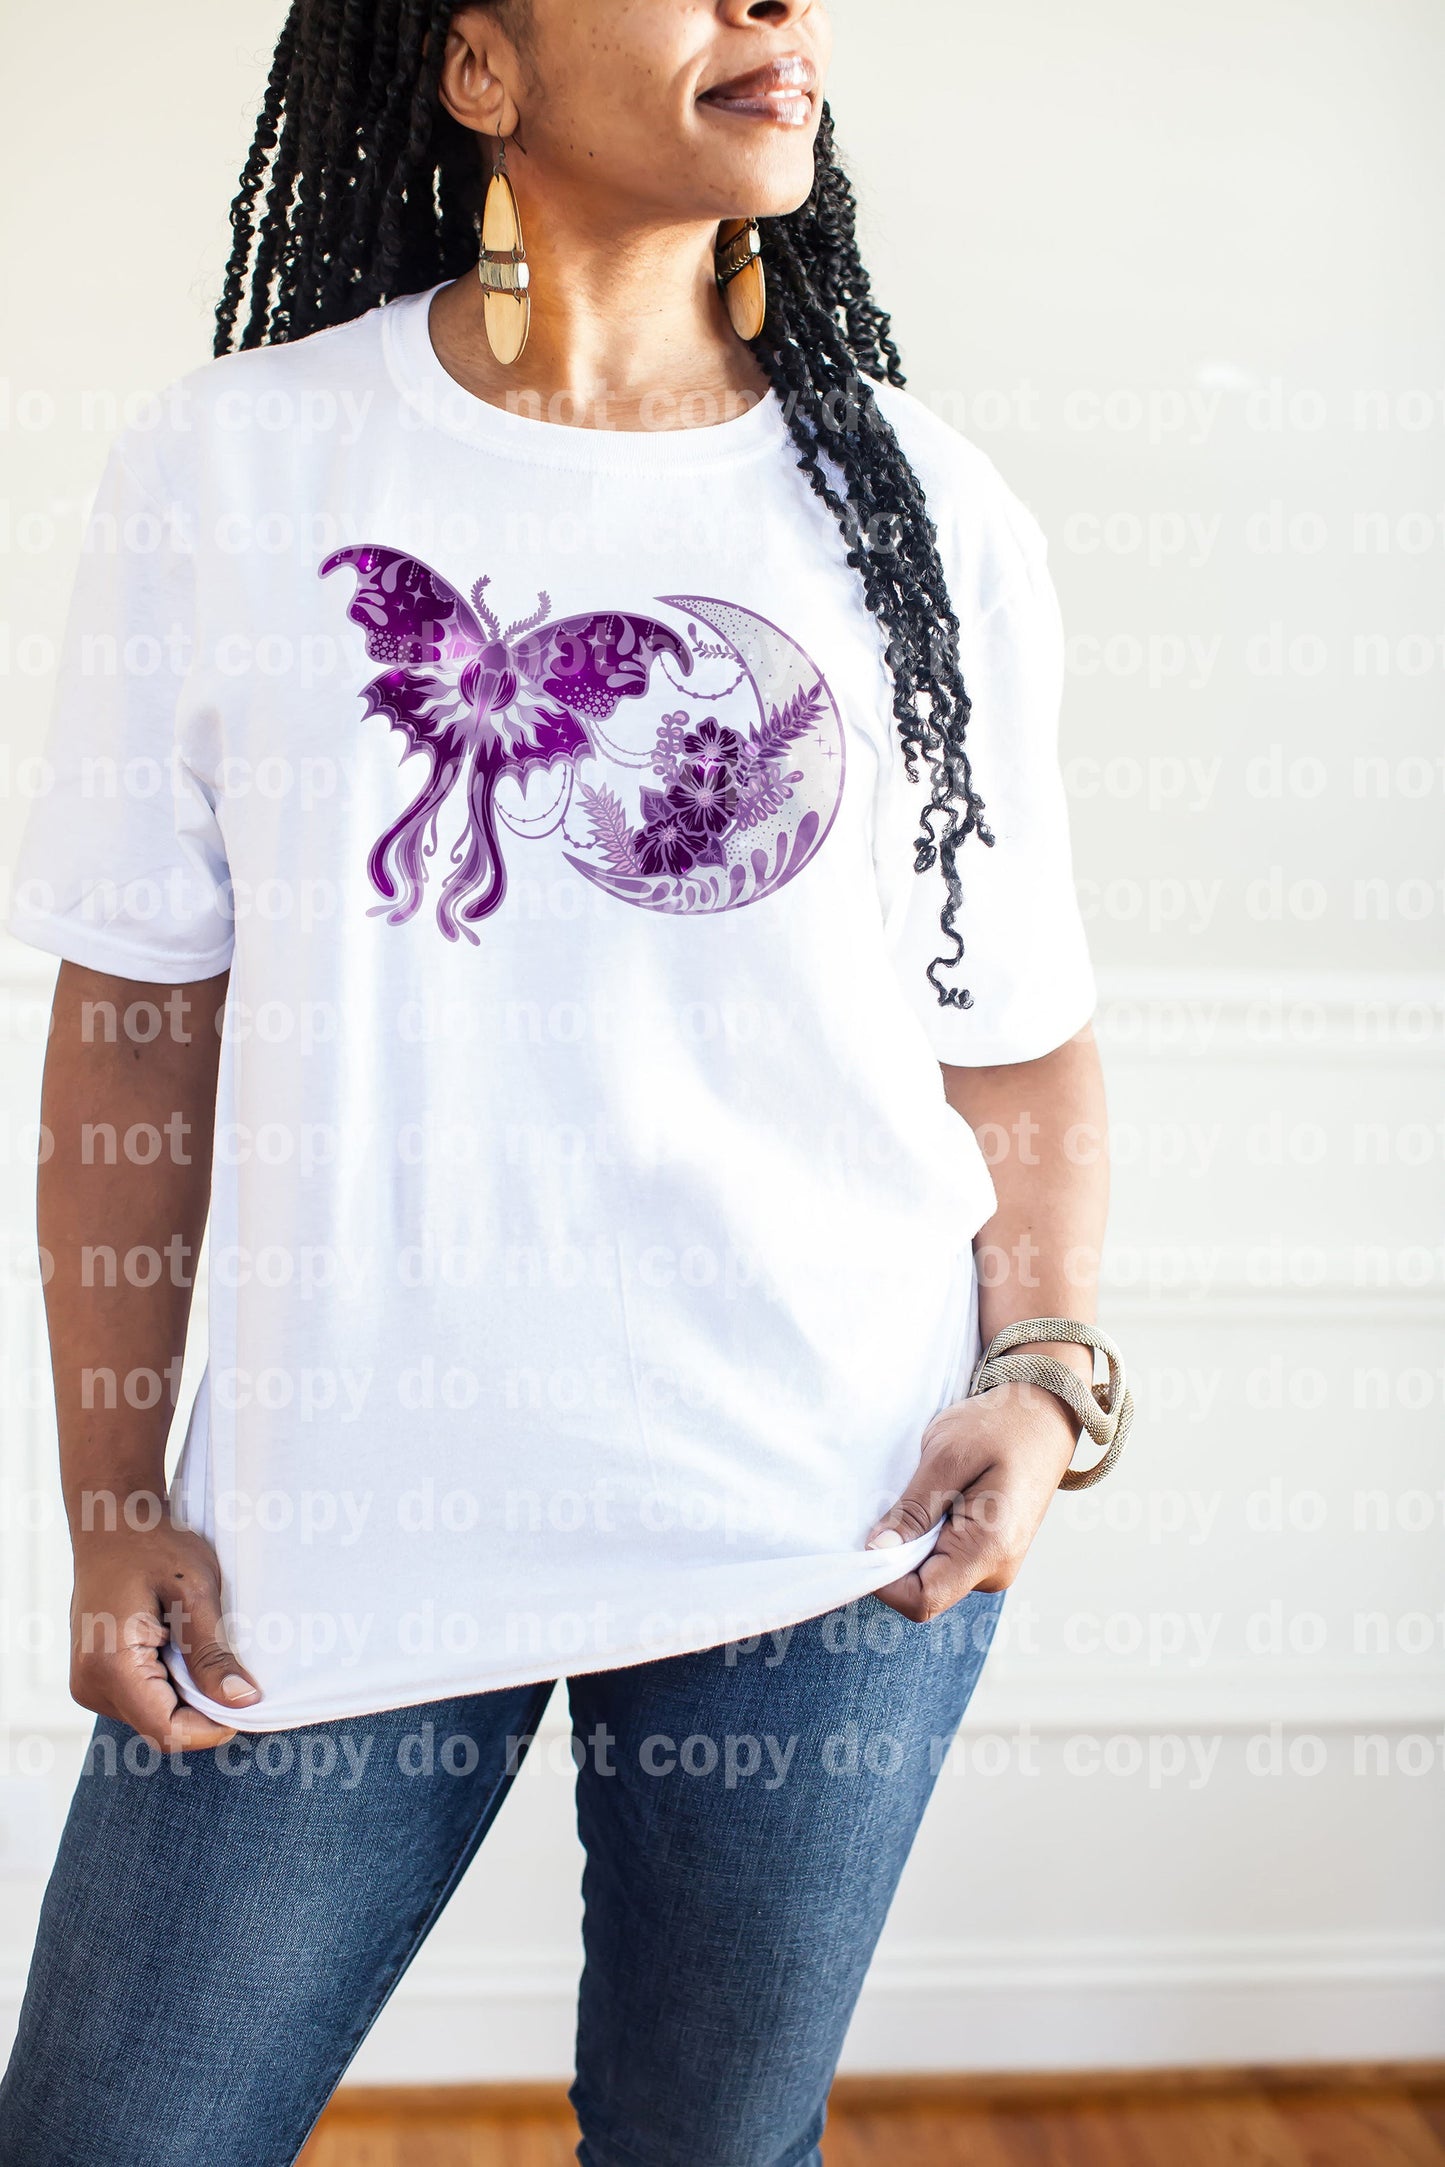 Magic Luna Moth Dream Print or Sublimation Print with Decal Option